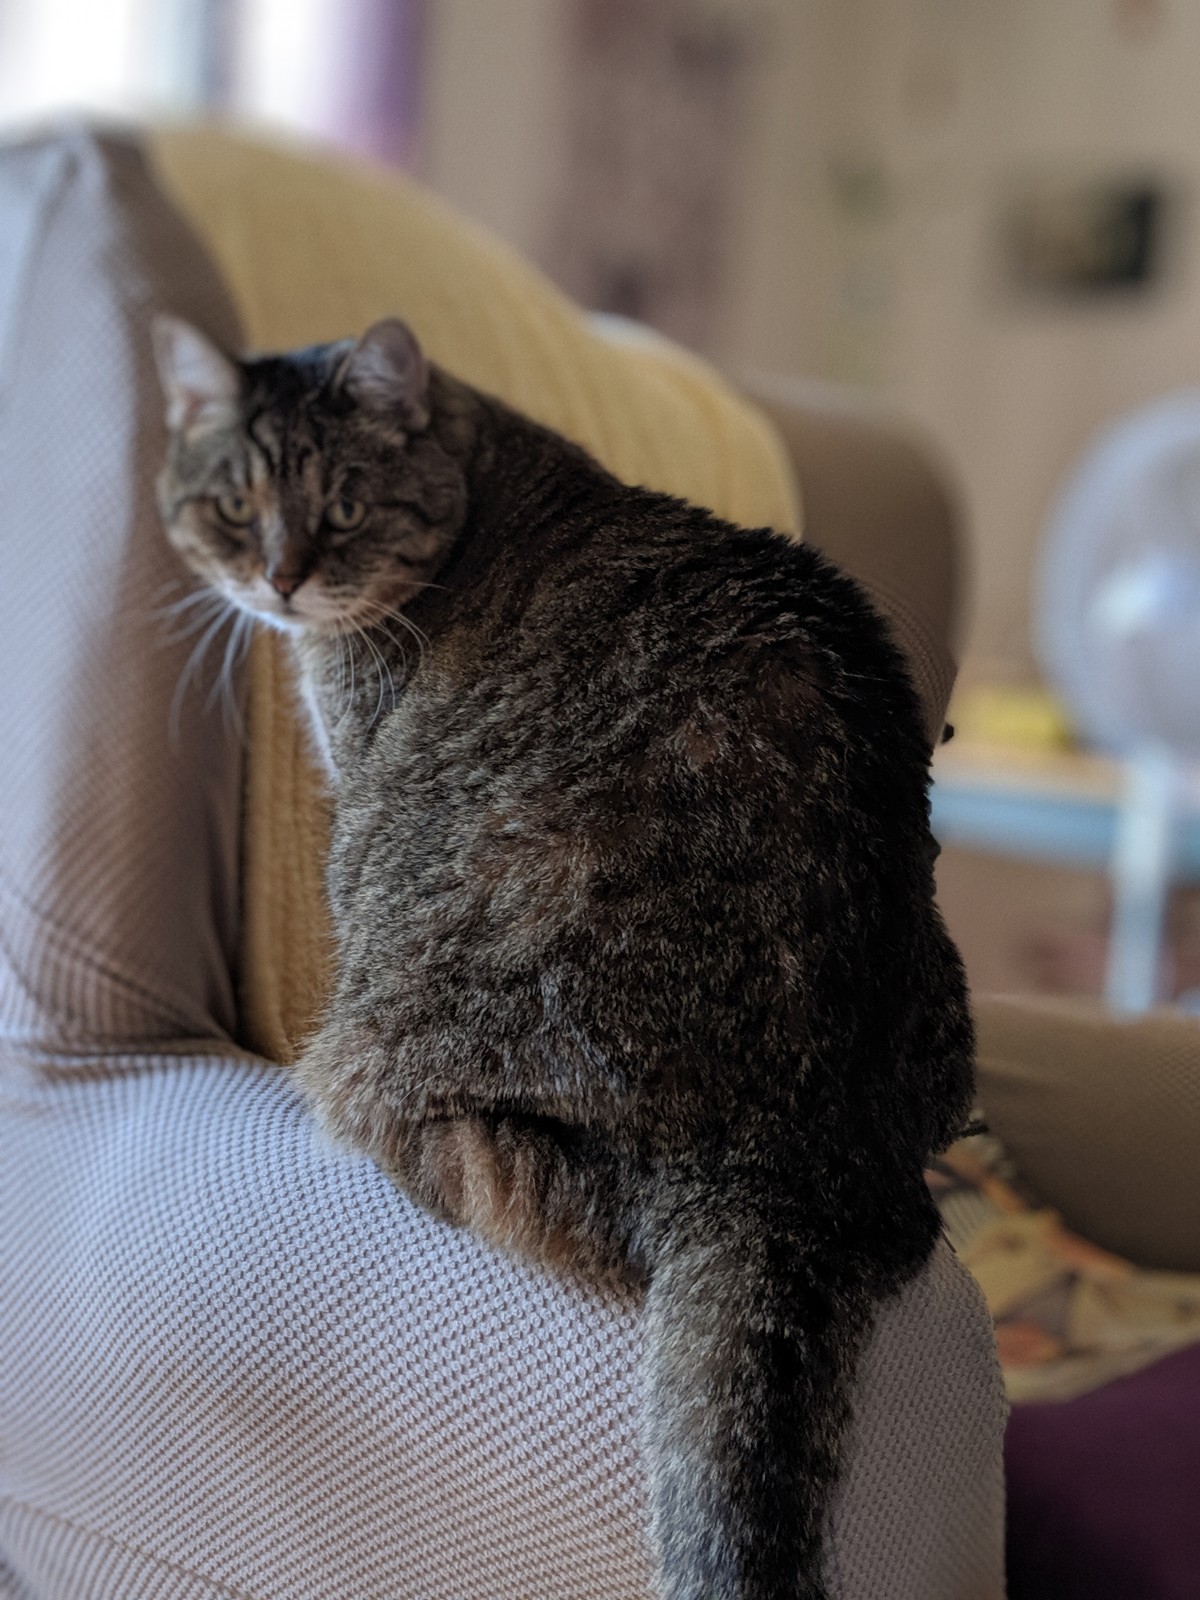 Tabby cat perched an armchair